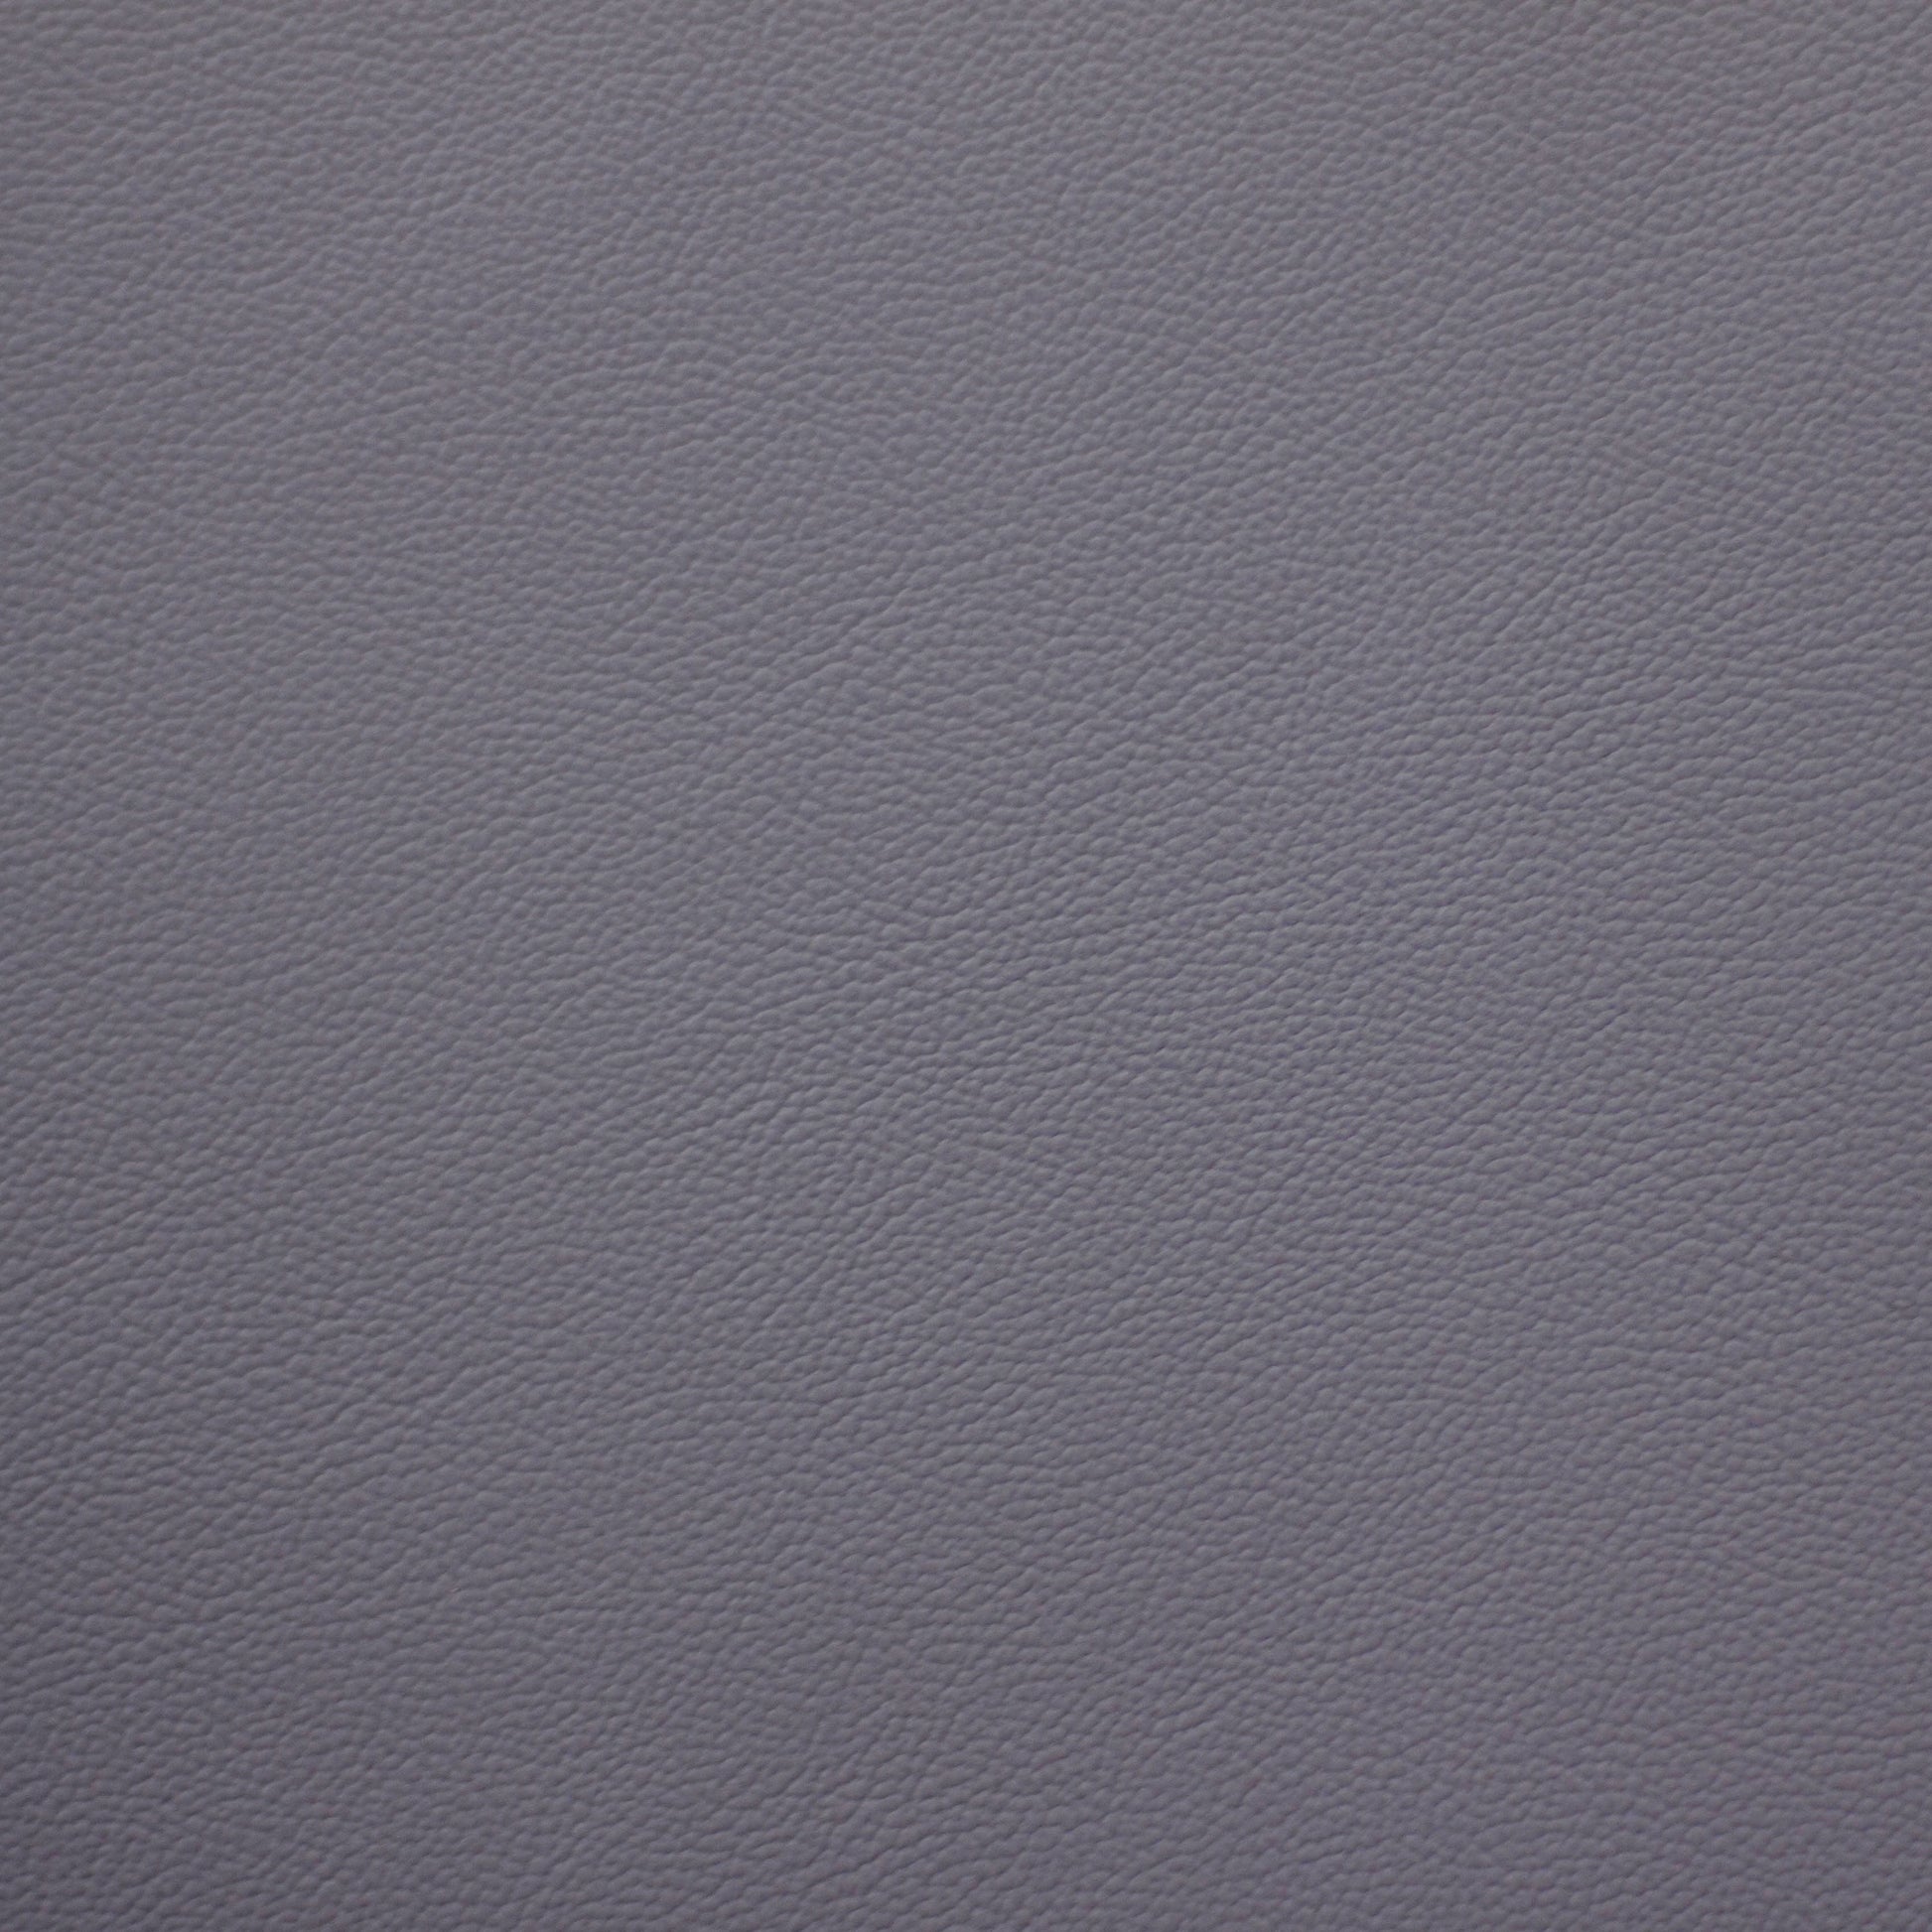 Empire, Nebula, Iconic® Antimicrobial & Cleanable, Hospitality Leather Hide